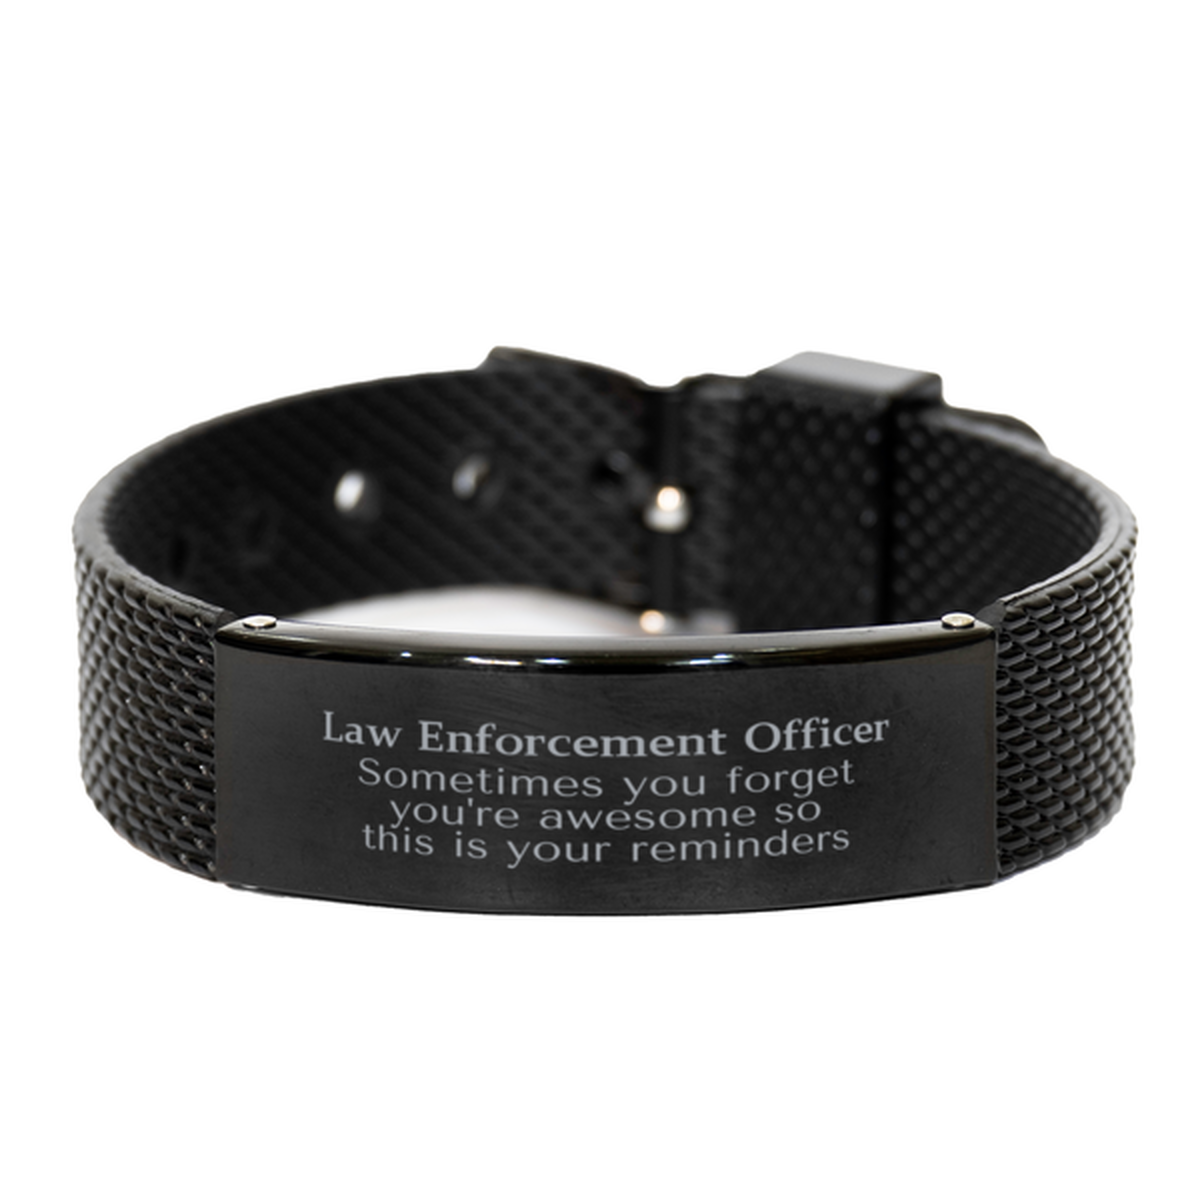 Sentimental Law Enforcement Officer Black Shark Mesh Bracelet, Law Enforcement Officer Sometimes you forget you're awesome so this is your reminders, Graduation Christmas Birthday Gifts for Law Enforcement Officer, Men, Women, Coworkers